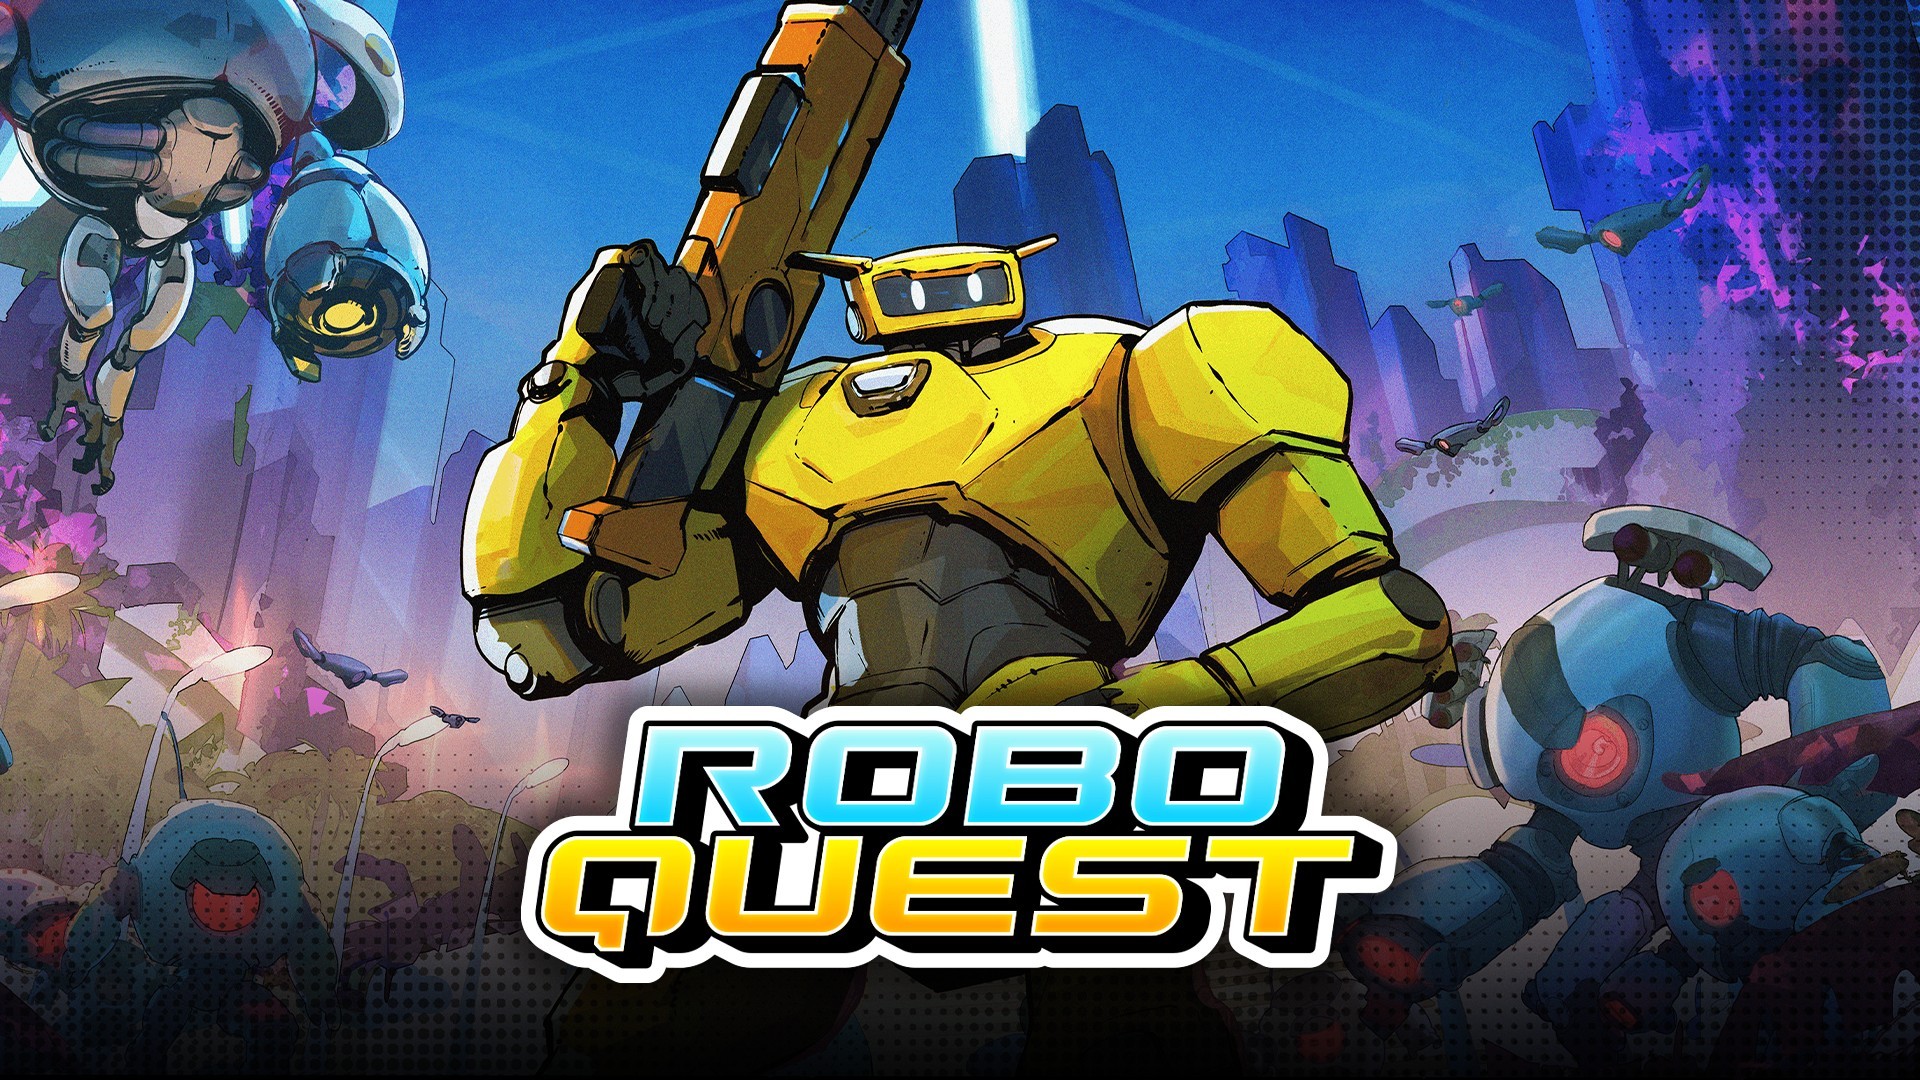 Roboquest Brings FPS Mayhem to PC Game Pass - Xbox Wire